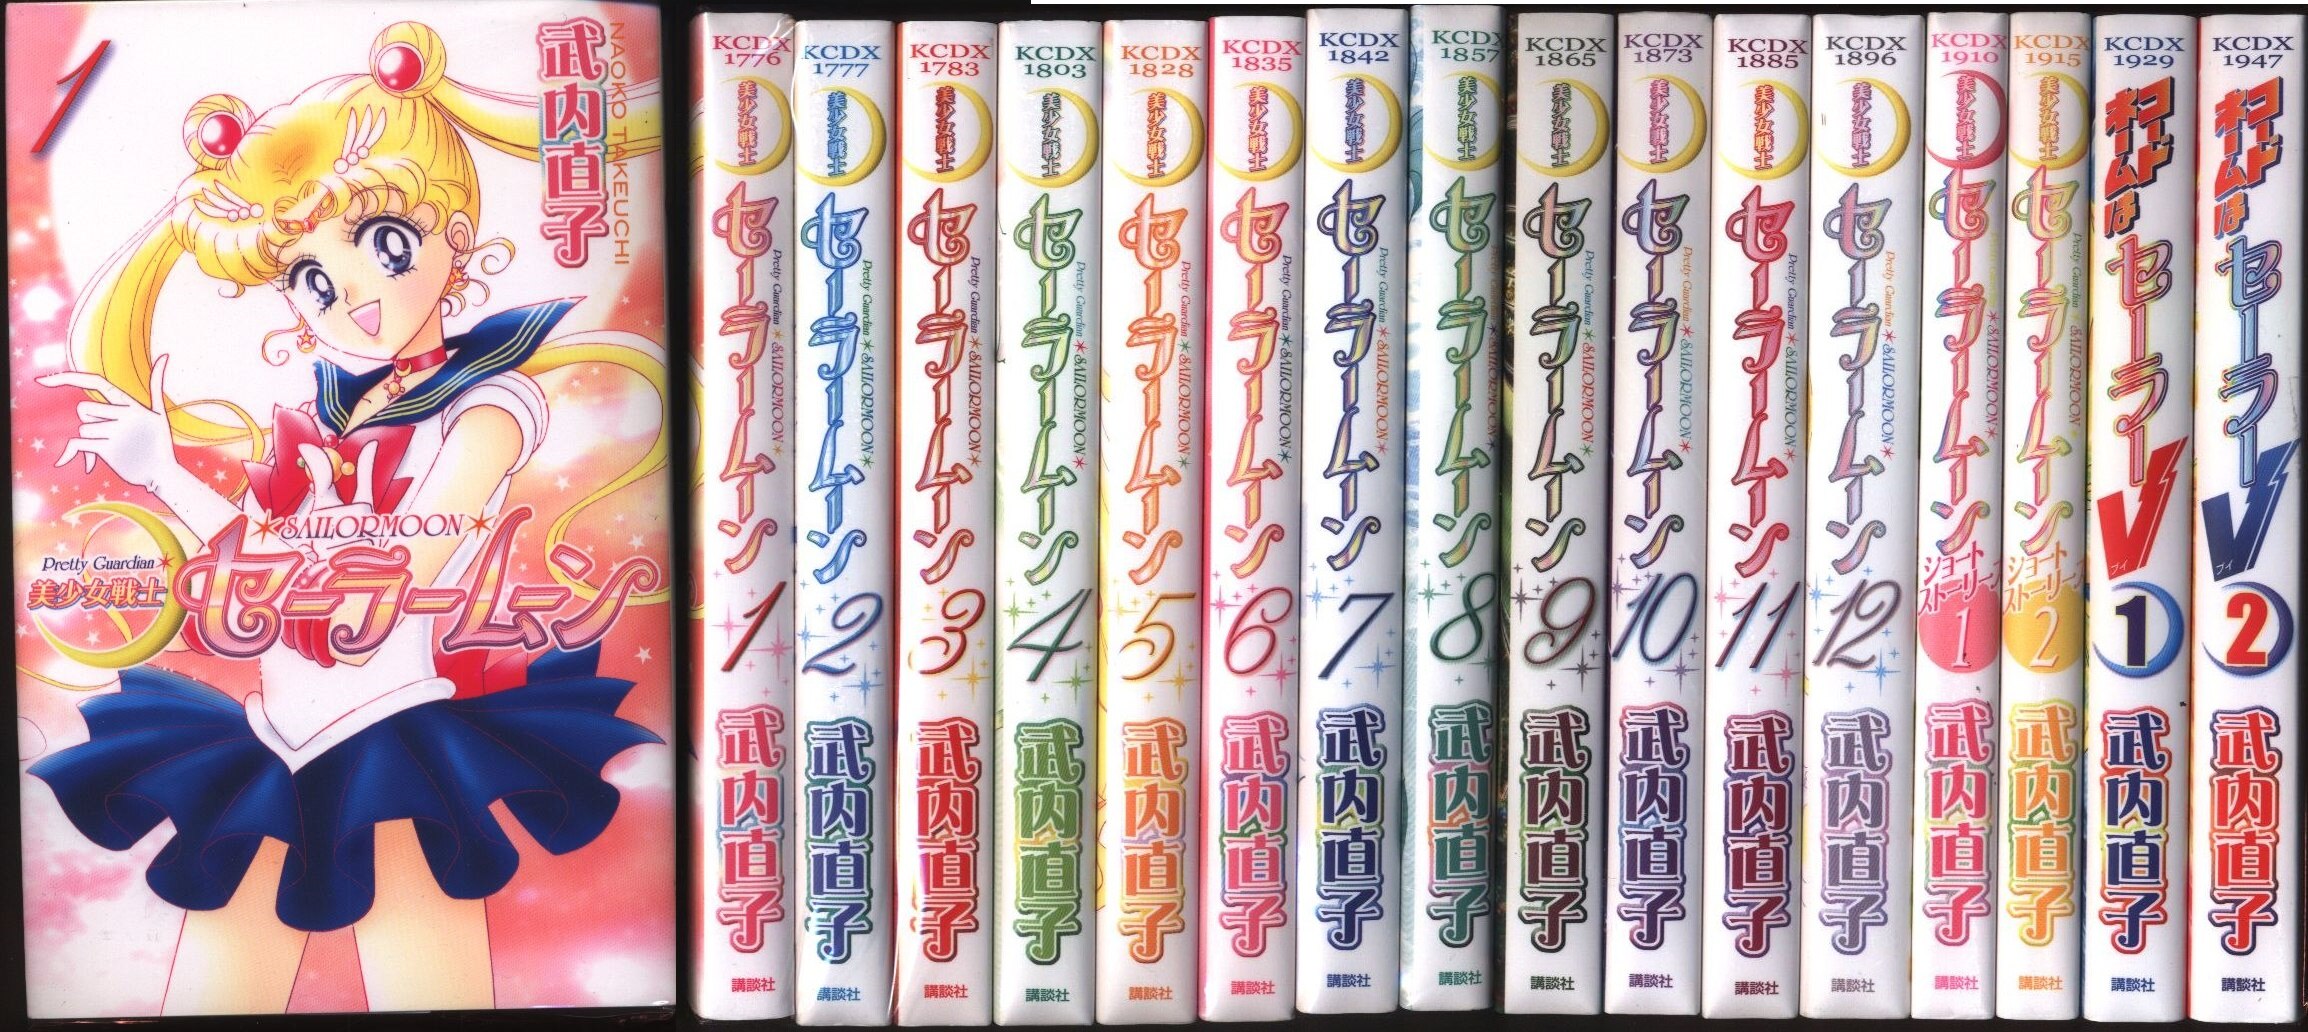 Sailor Moon Pretty Soldier all 12 volumes complete set New edition From Japan 